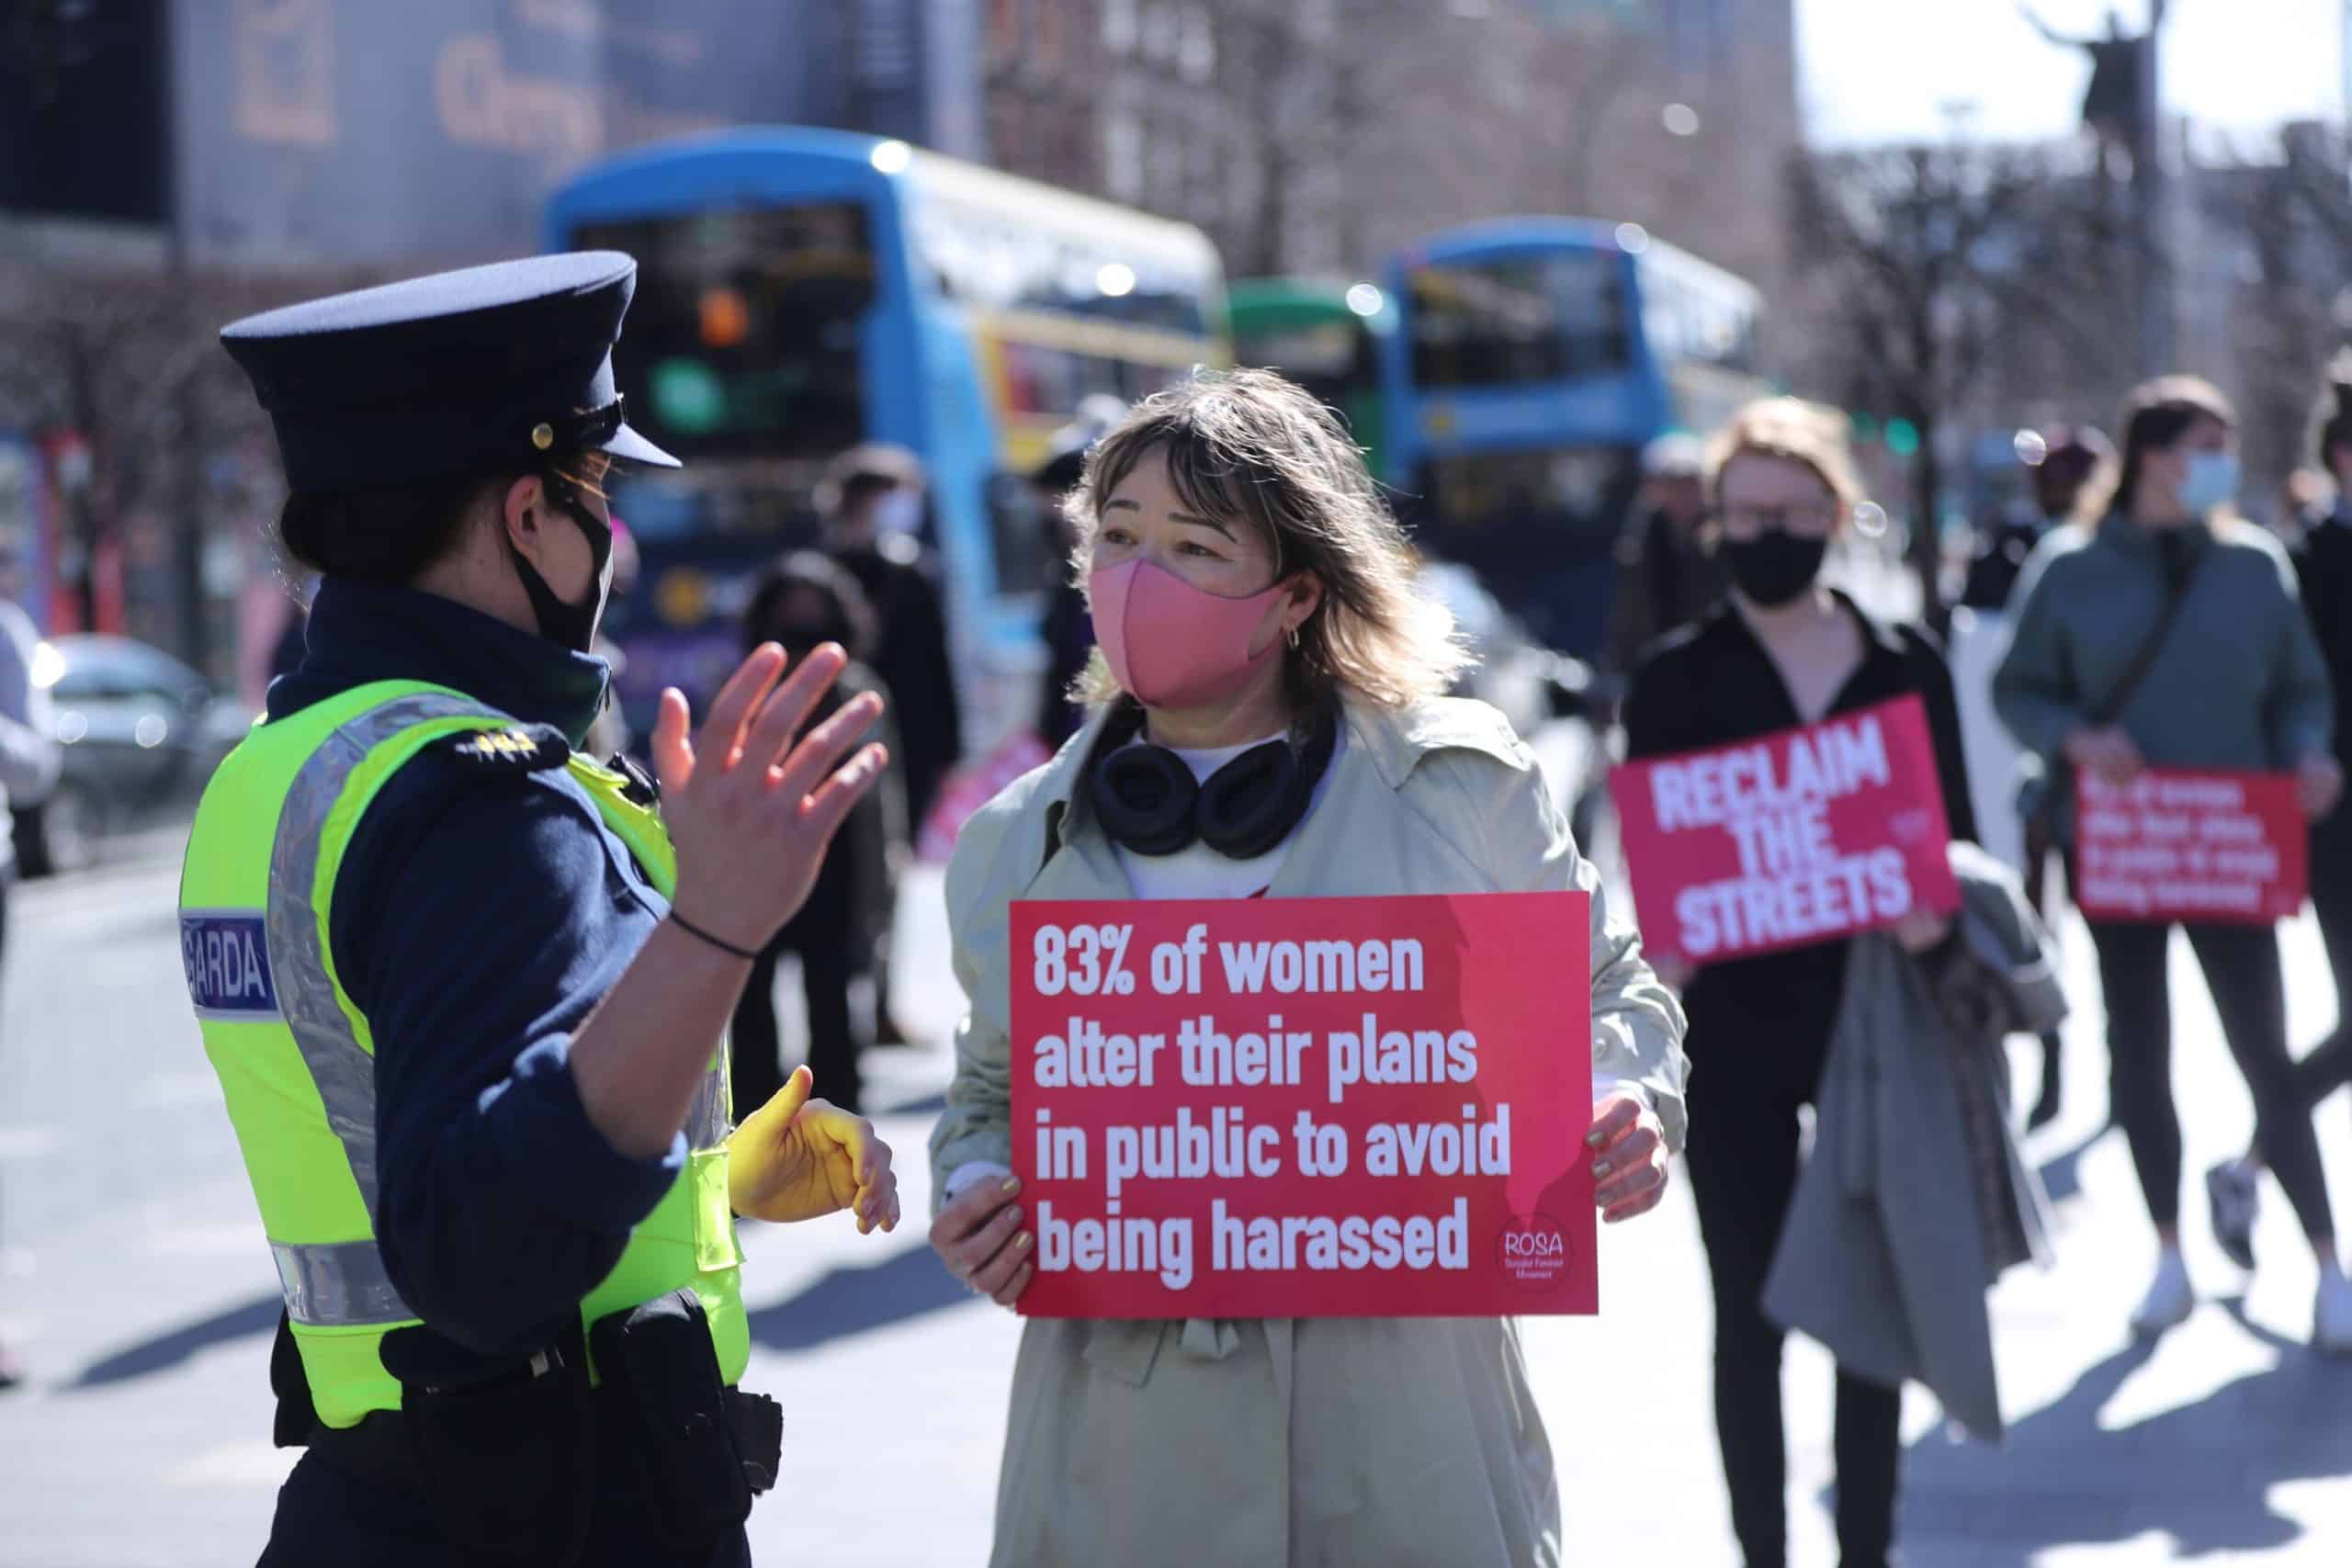 Women ‘assaulted’ and ‘abused’ by men while marching for their rights and safety